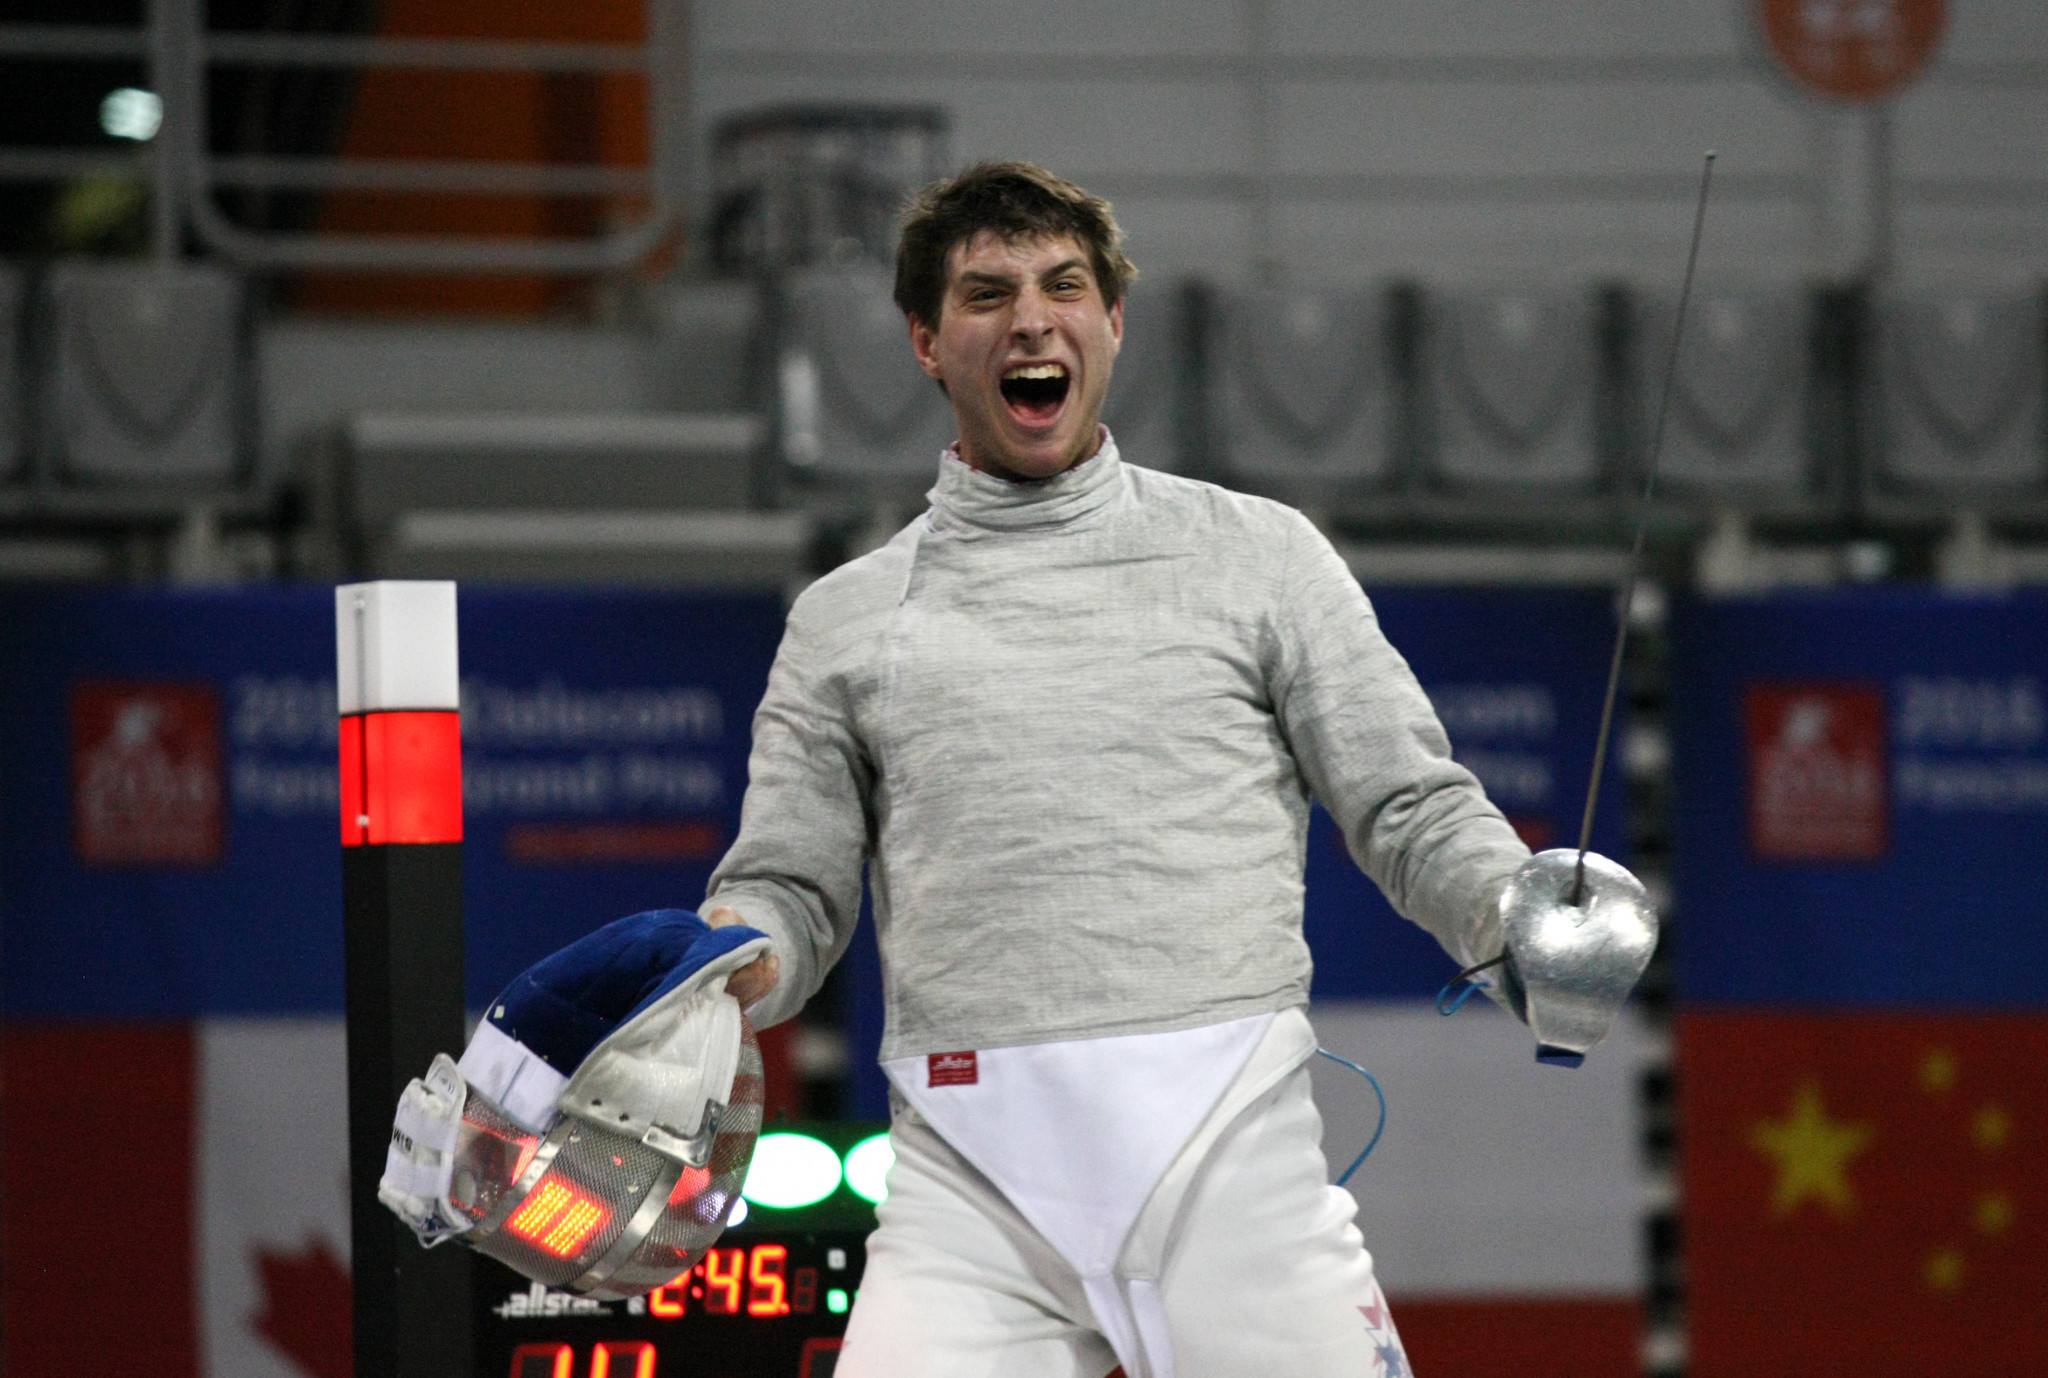 Dershwitz to head American challenge at Pan American Fencing Championships as country eyes more dominance